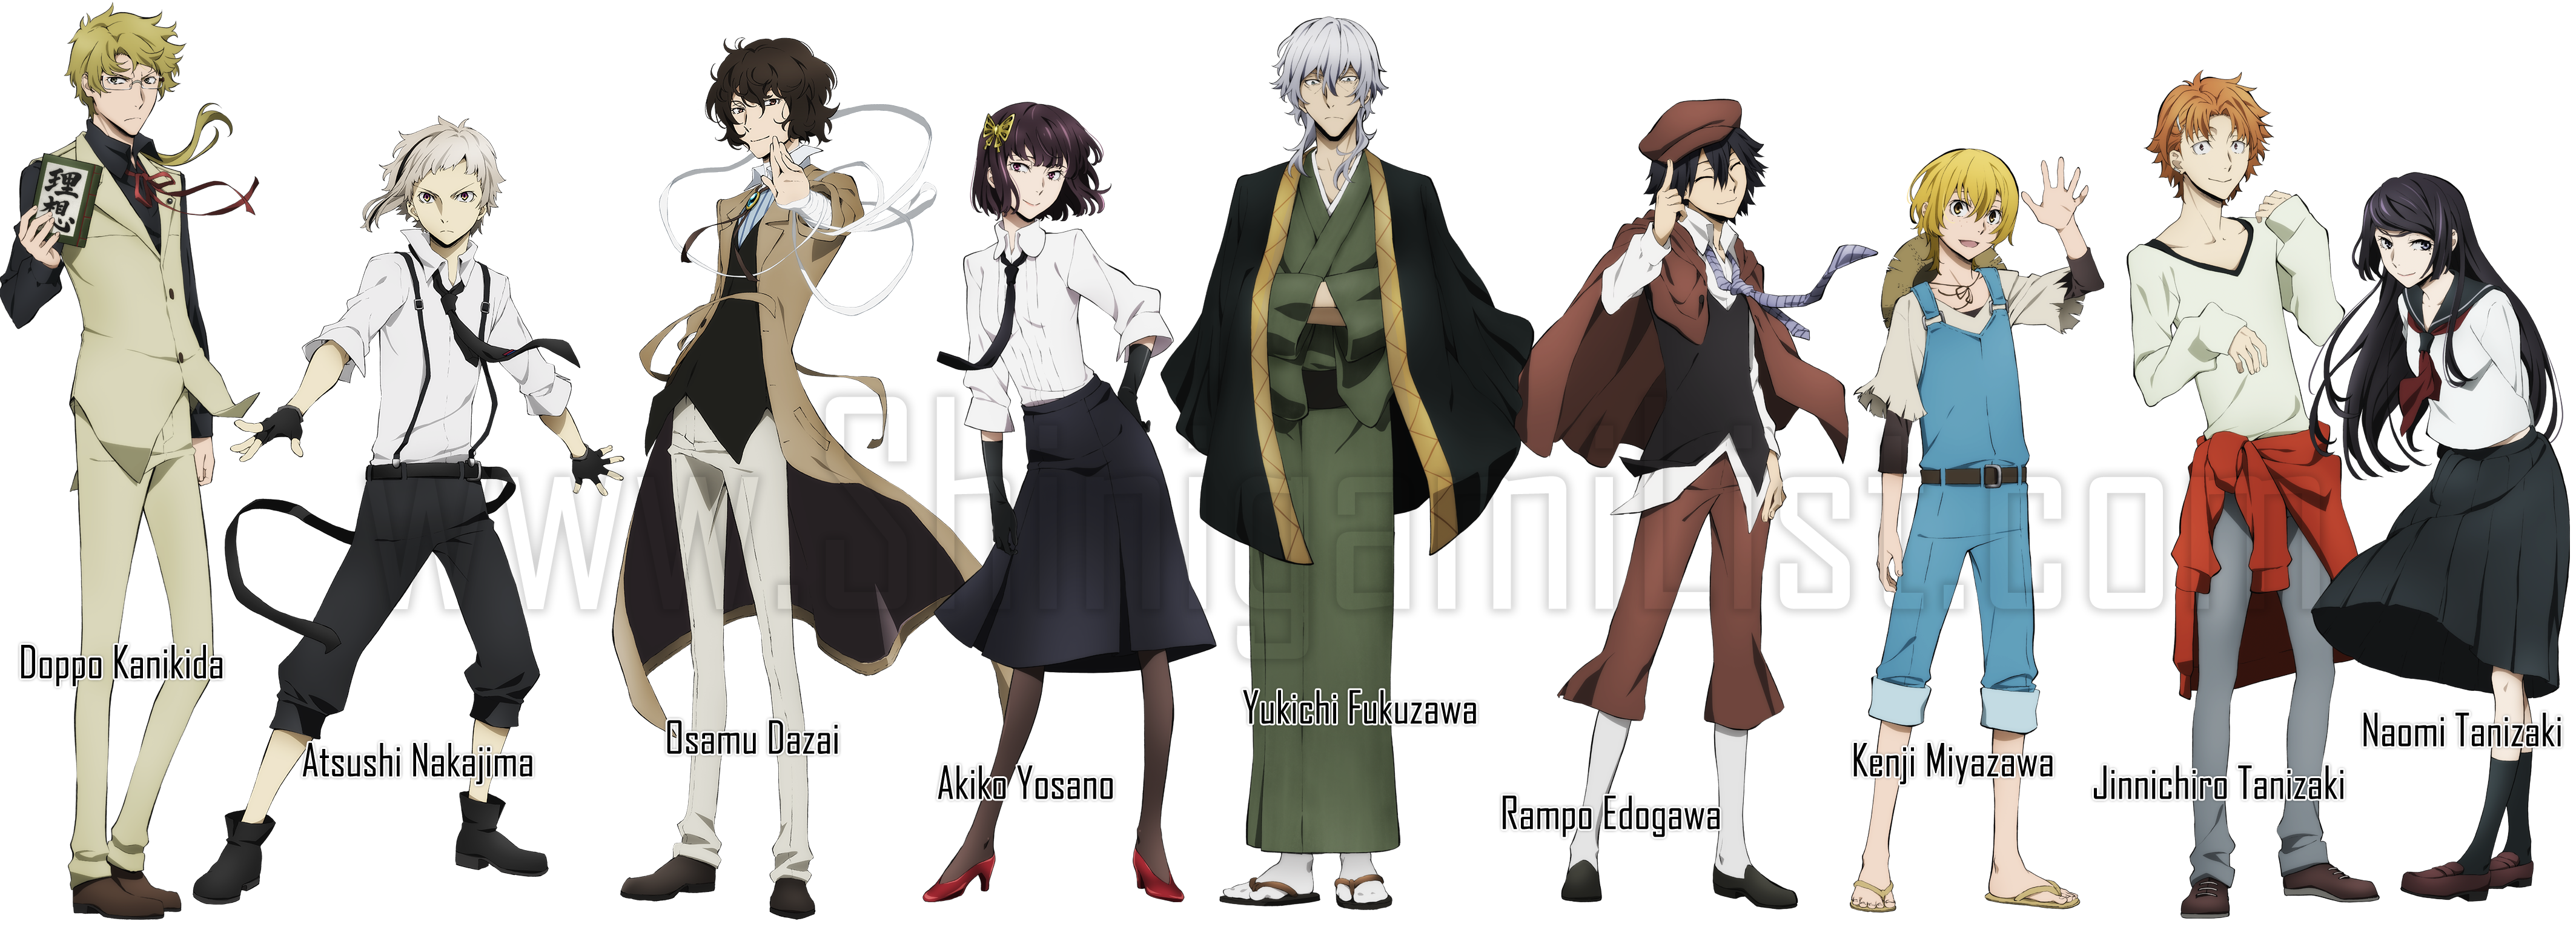 bungou-stray-dogs-special-detective-agency-characters